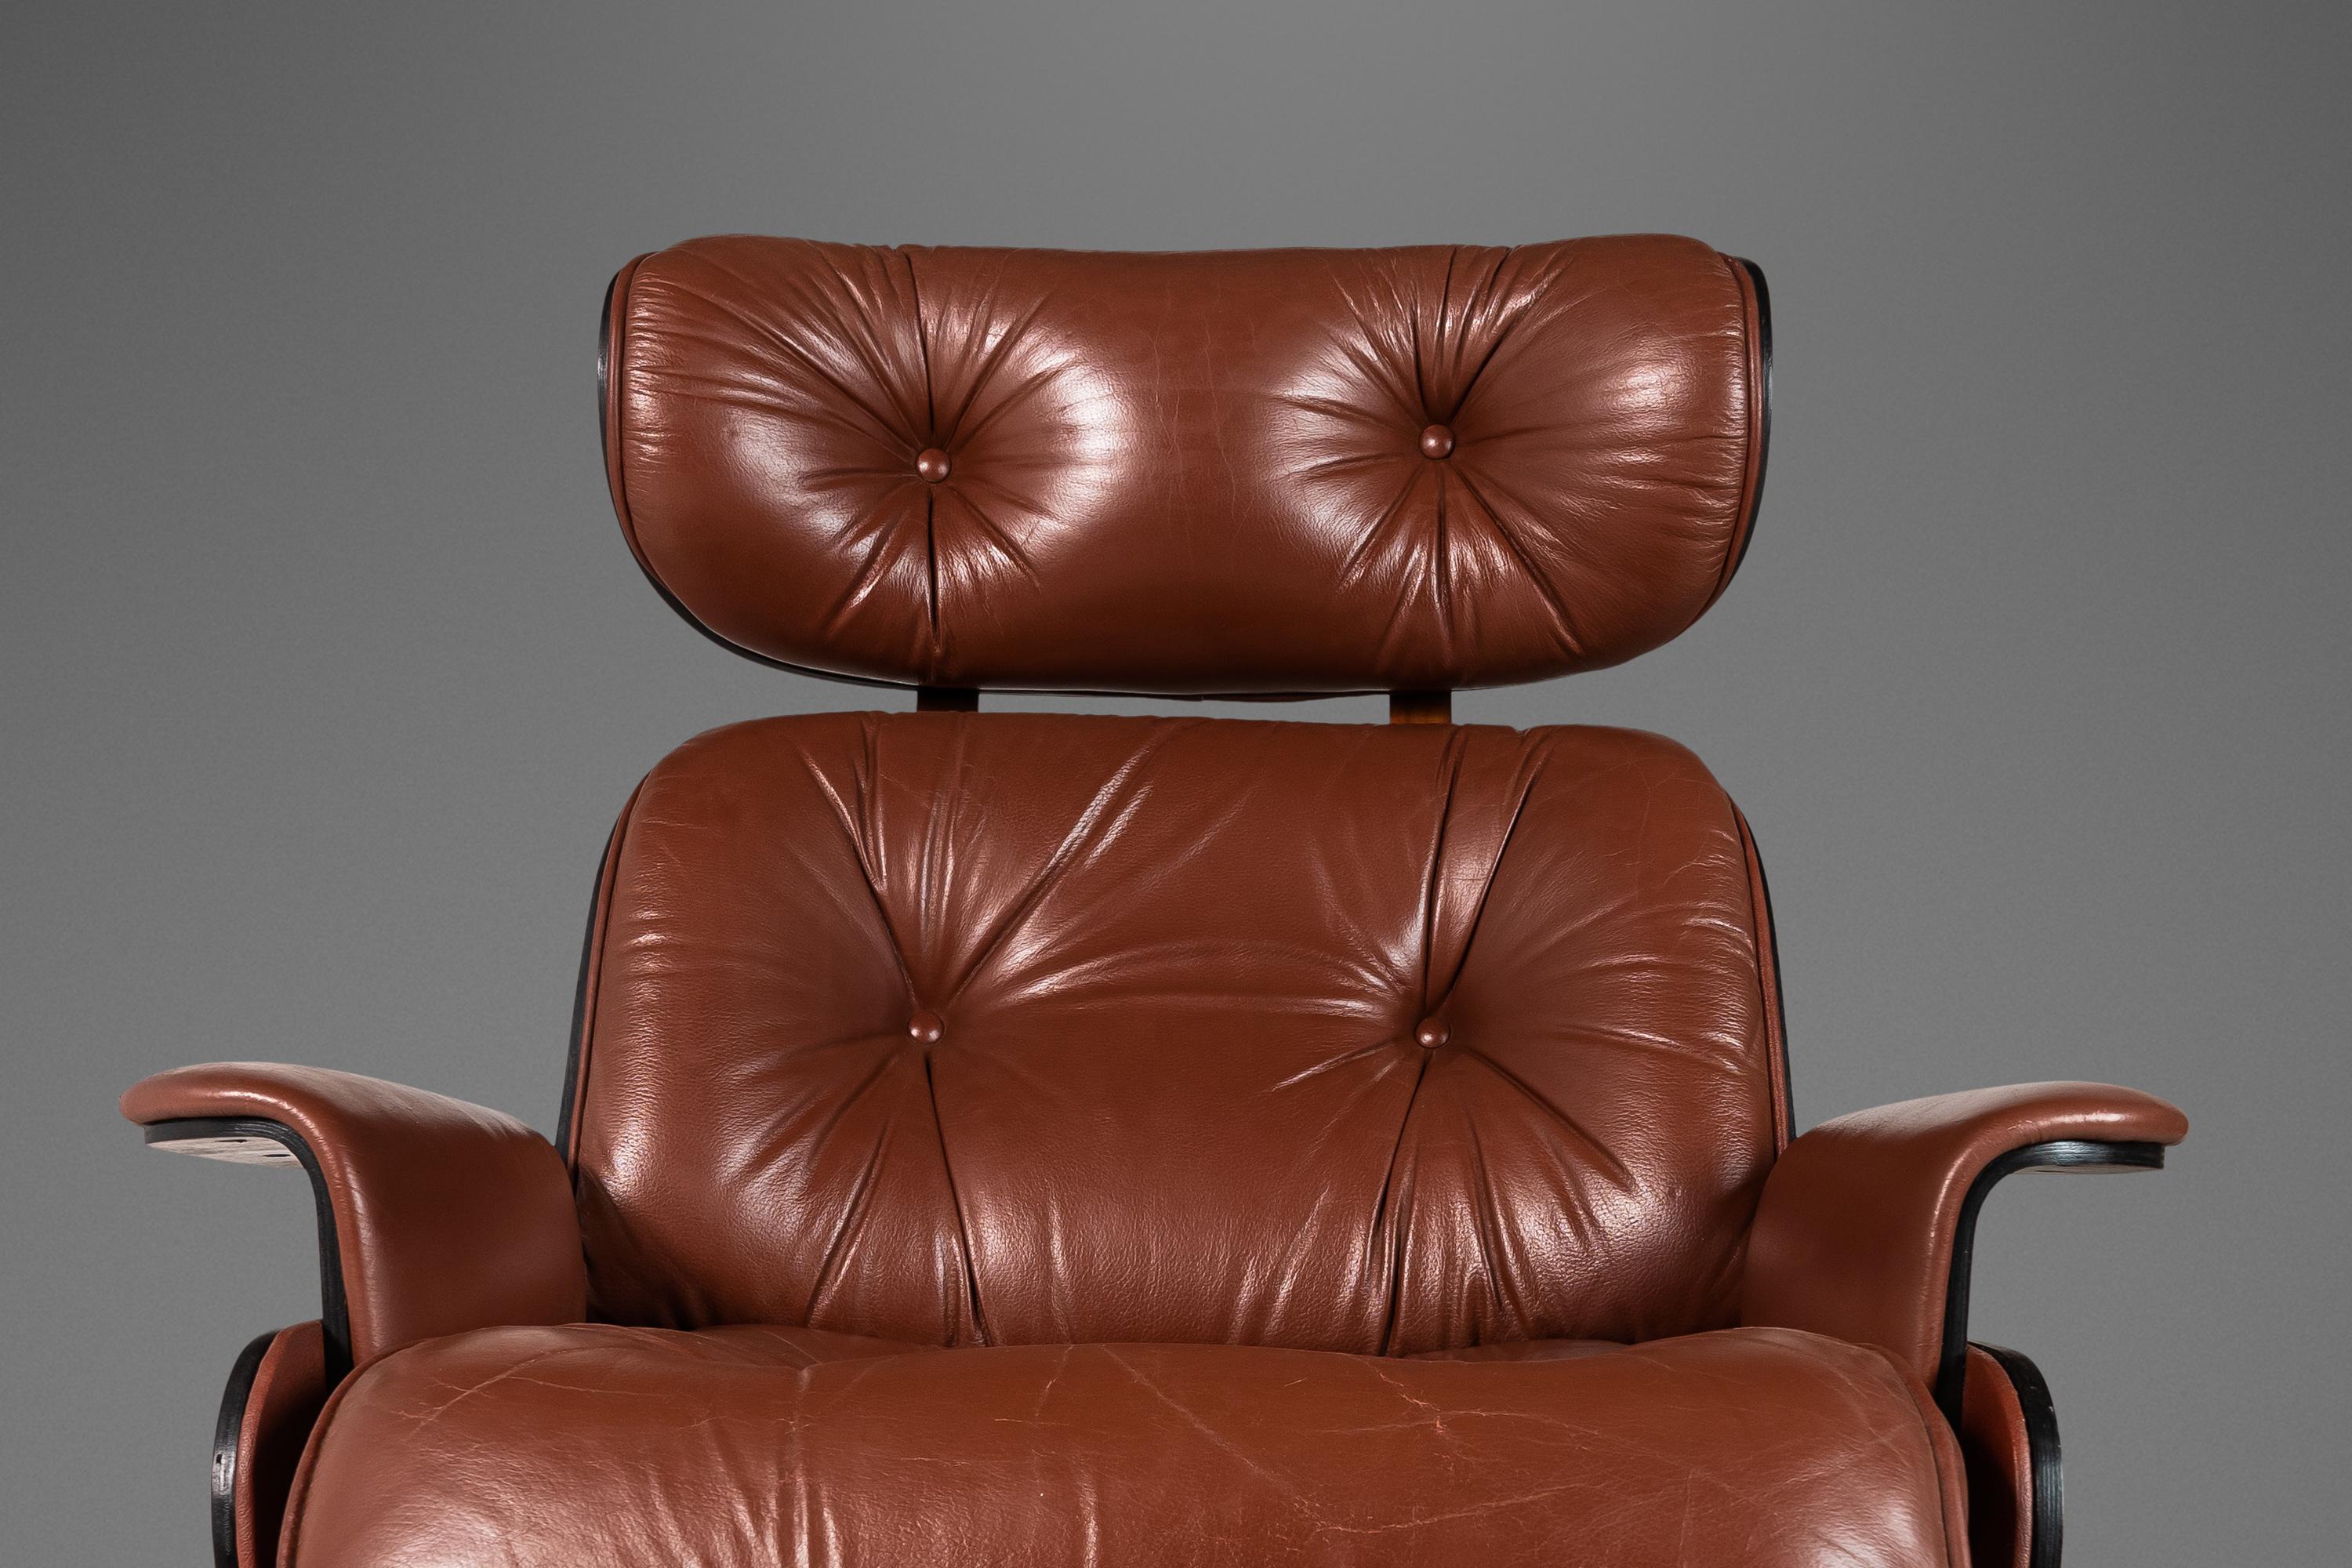 Mid-20th Century Lounge Chair Recliner Attributed to George Mulhauser for Plycraft, USA, c. 1960s